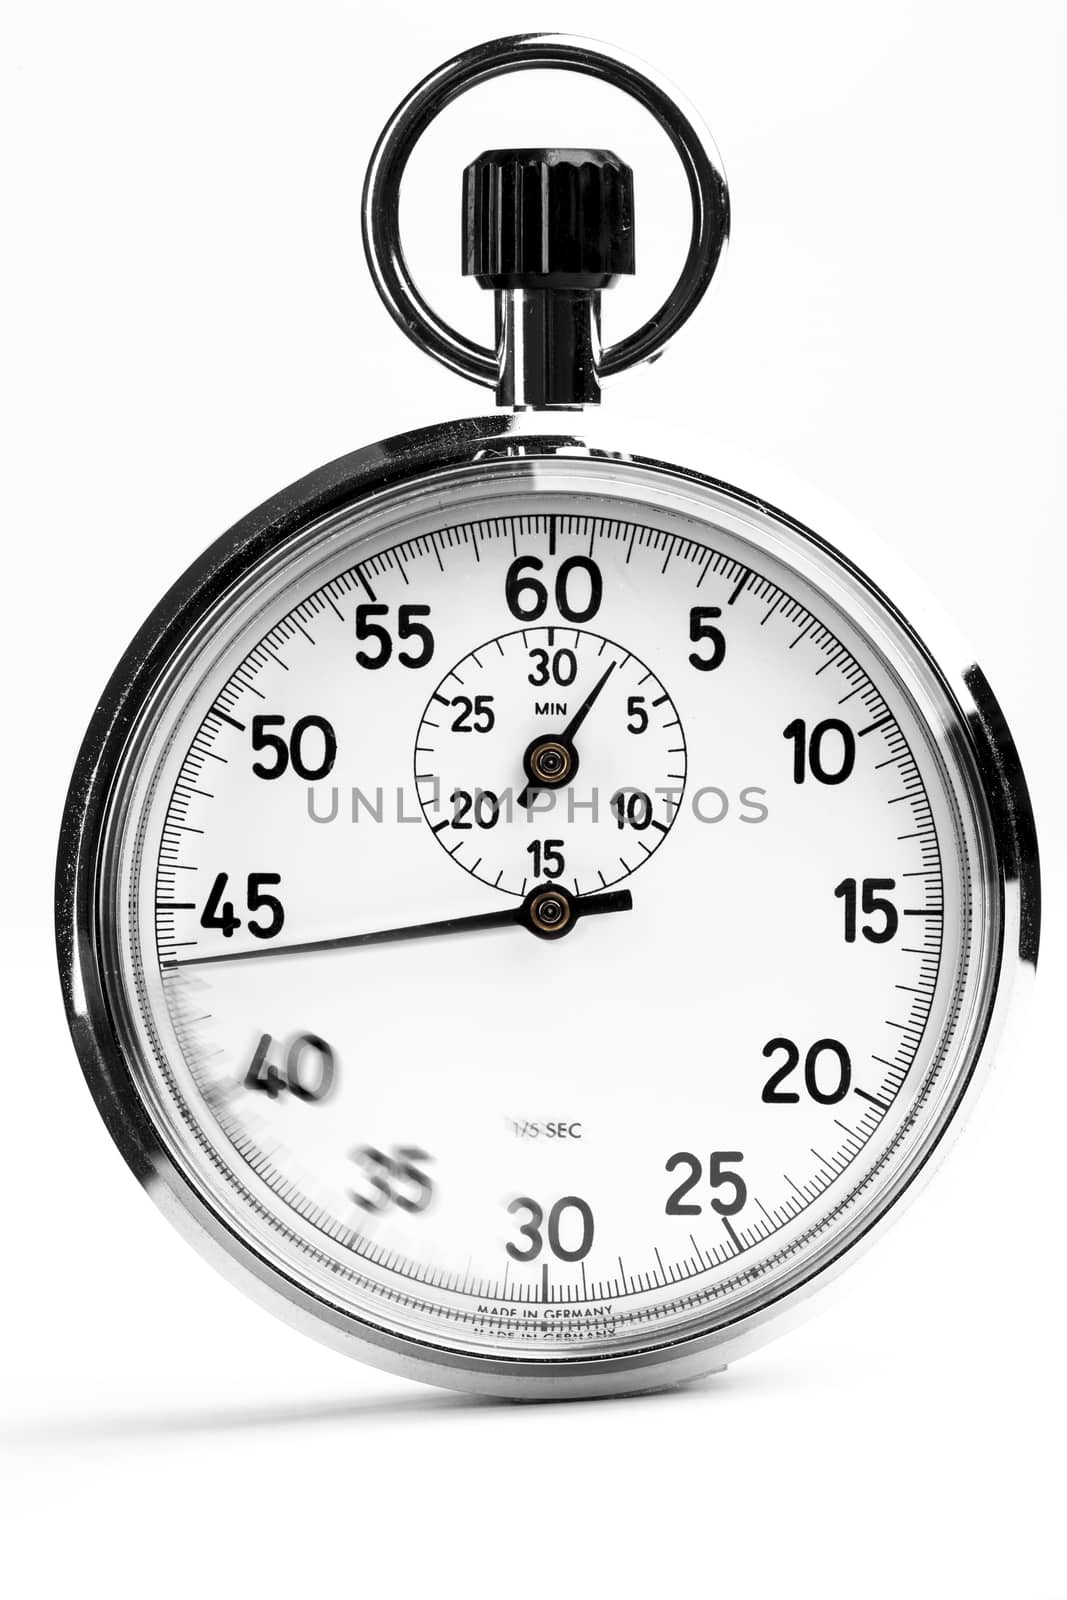 Analog Stopwatch by orcearo